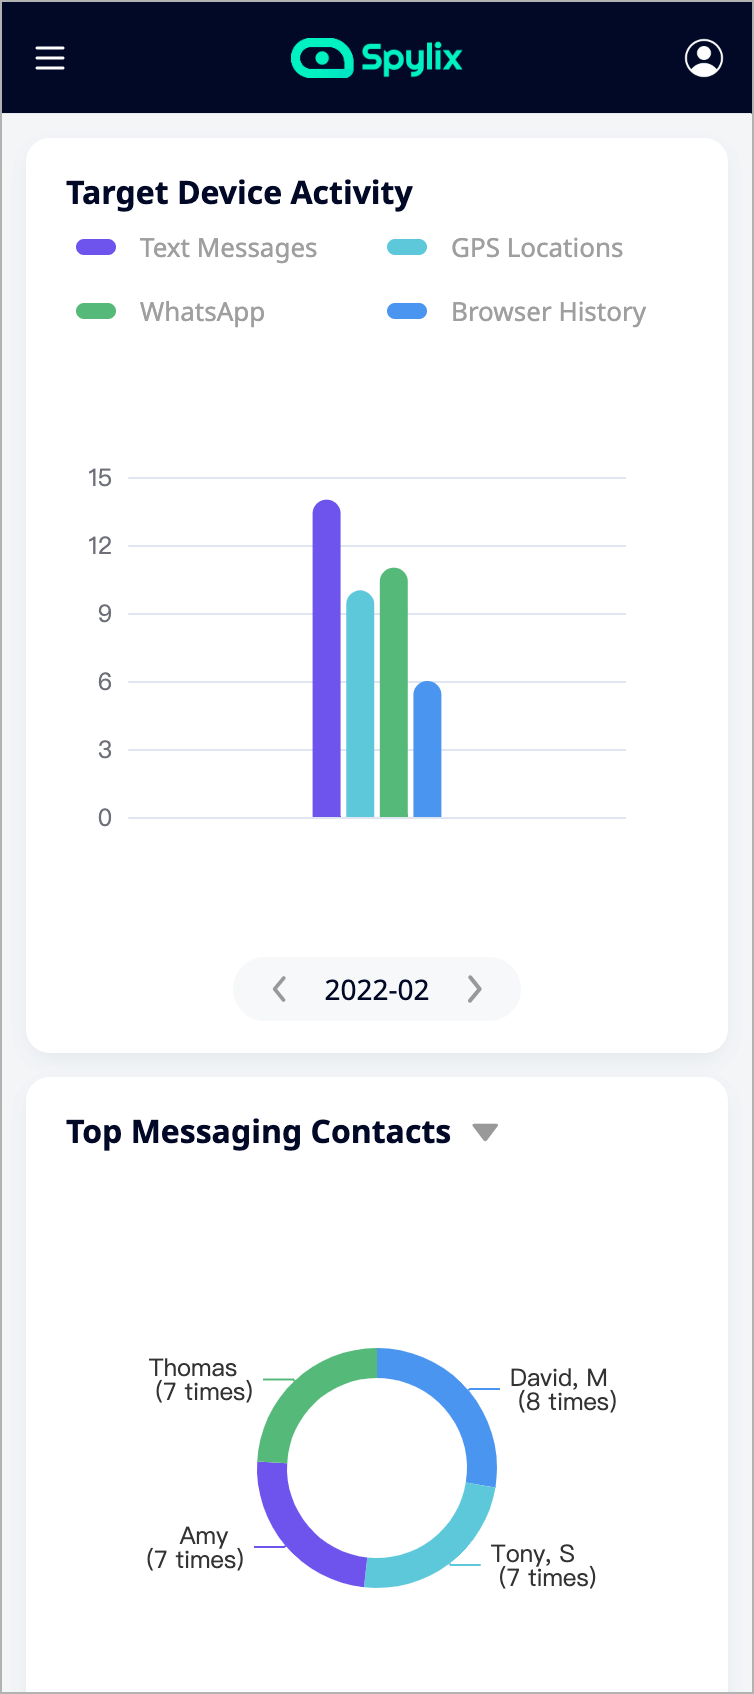 Spylix's Control Panel Shows Most Messaging Contacts